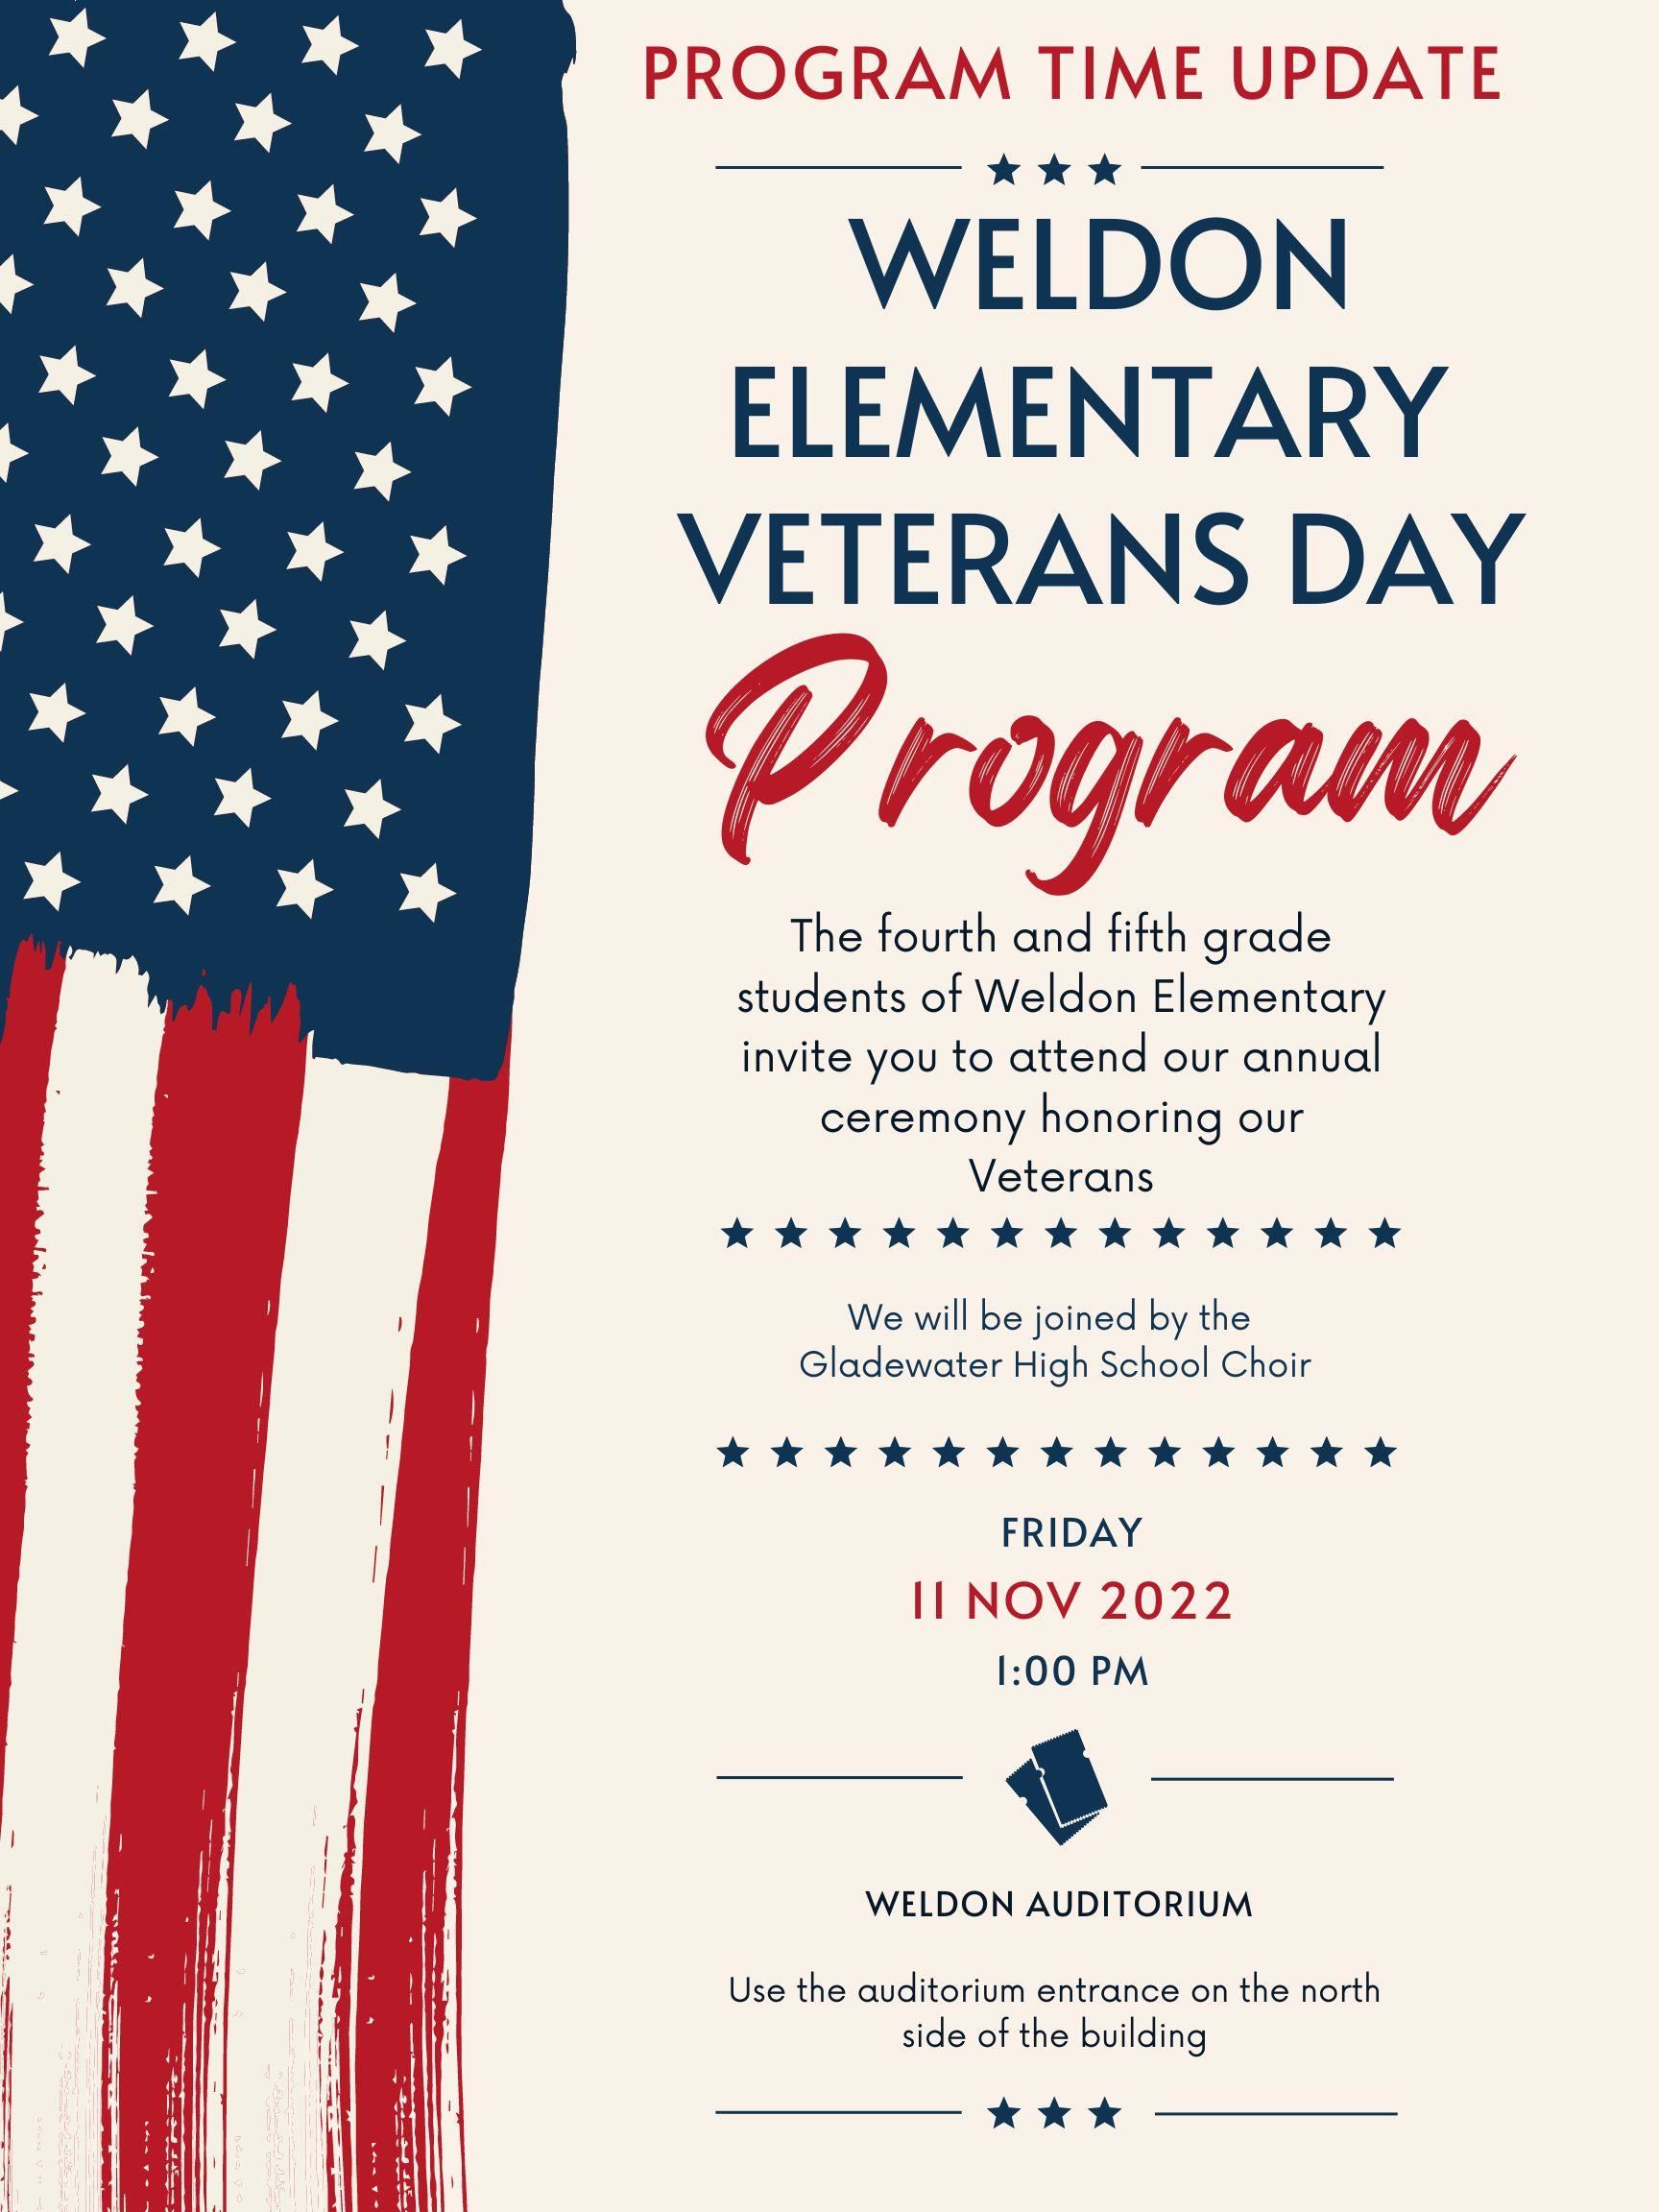 Vets Day @ WES 11/11 1:00 PM